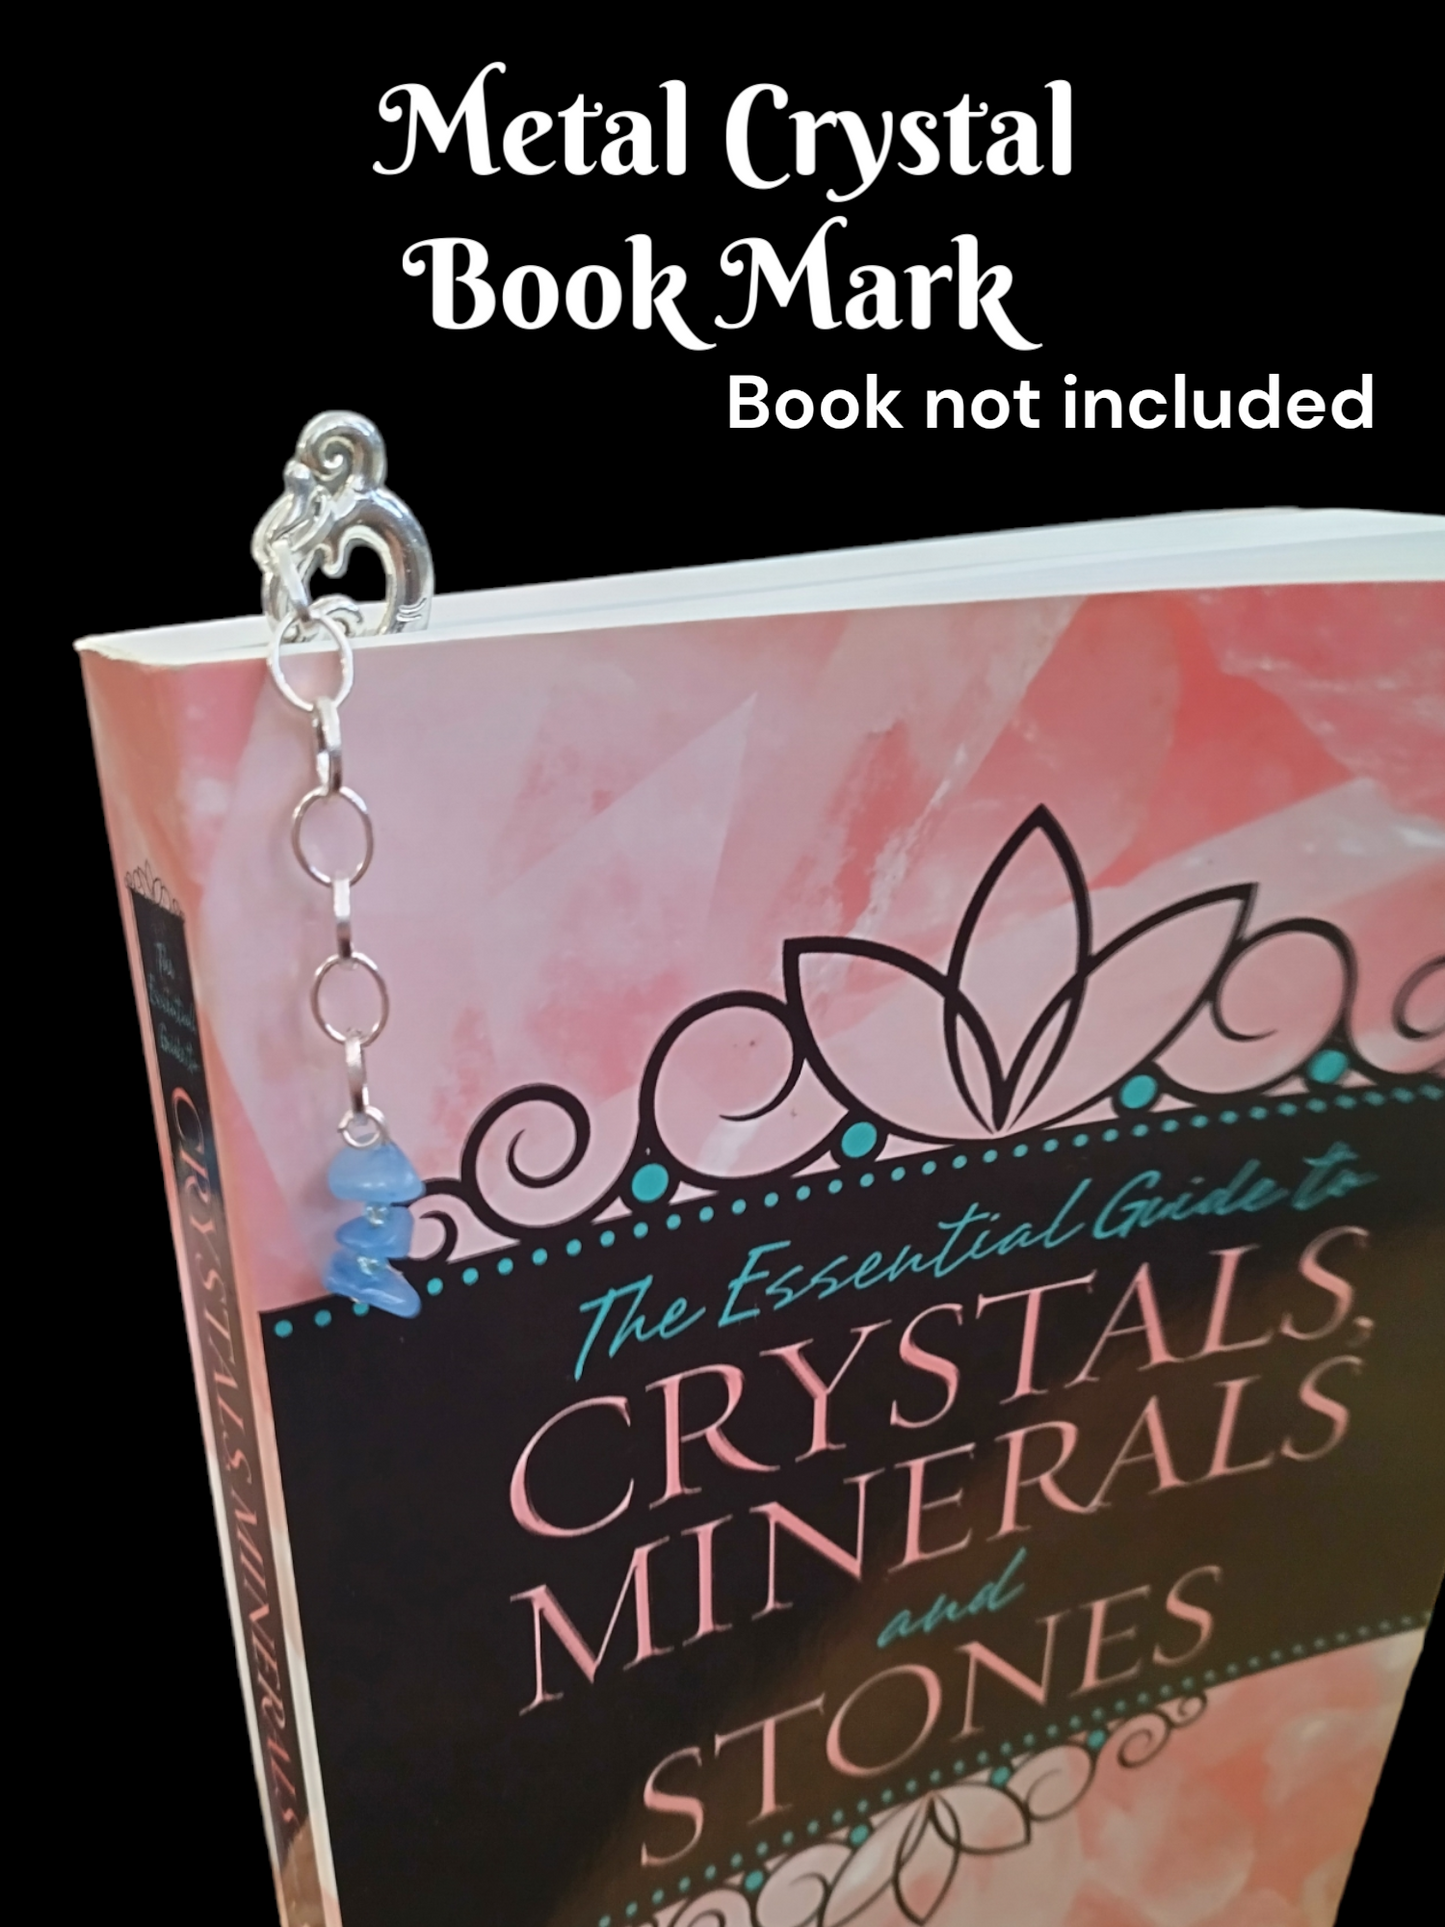 Bookmark with crystals